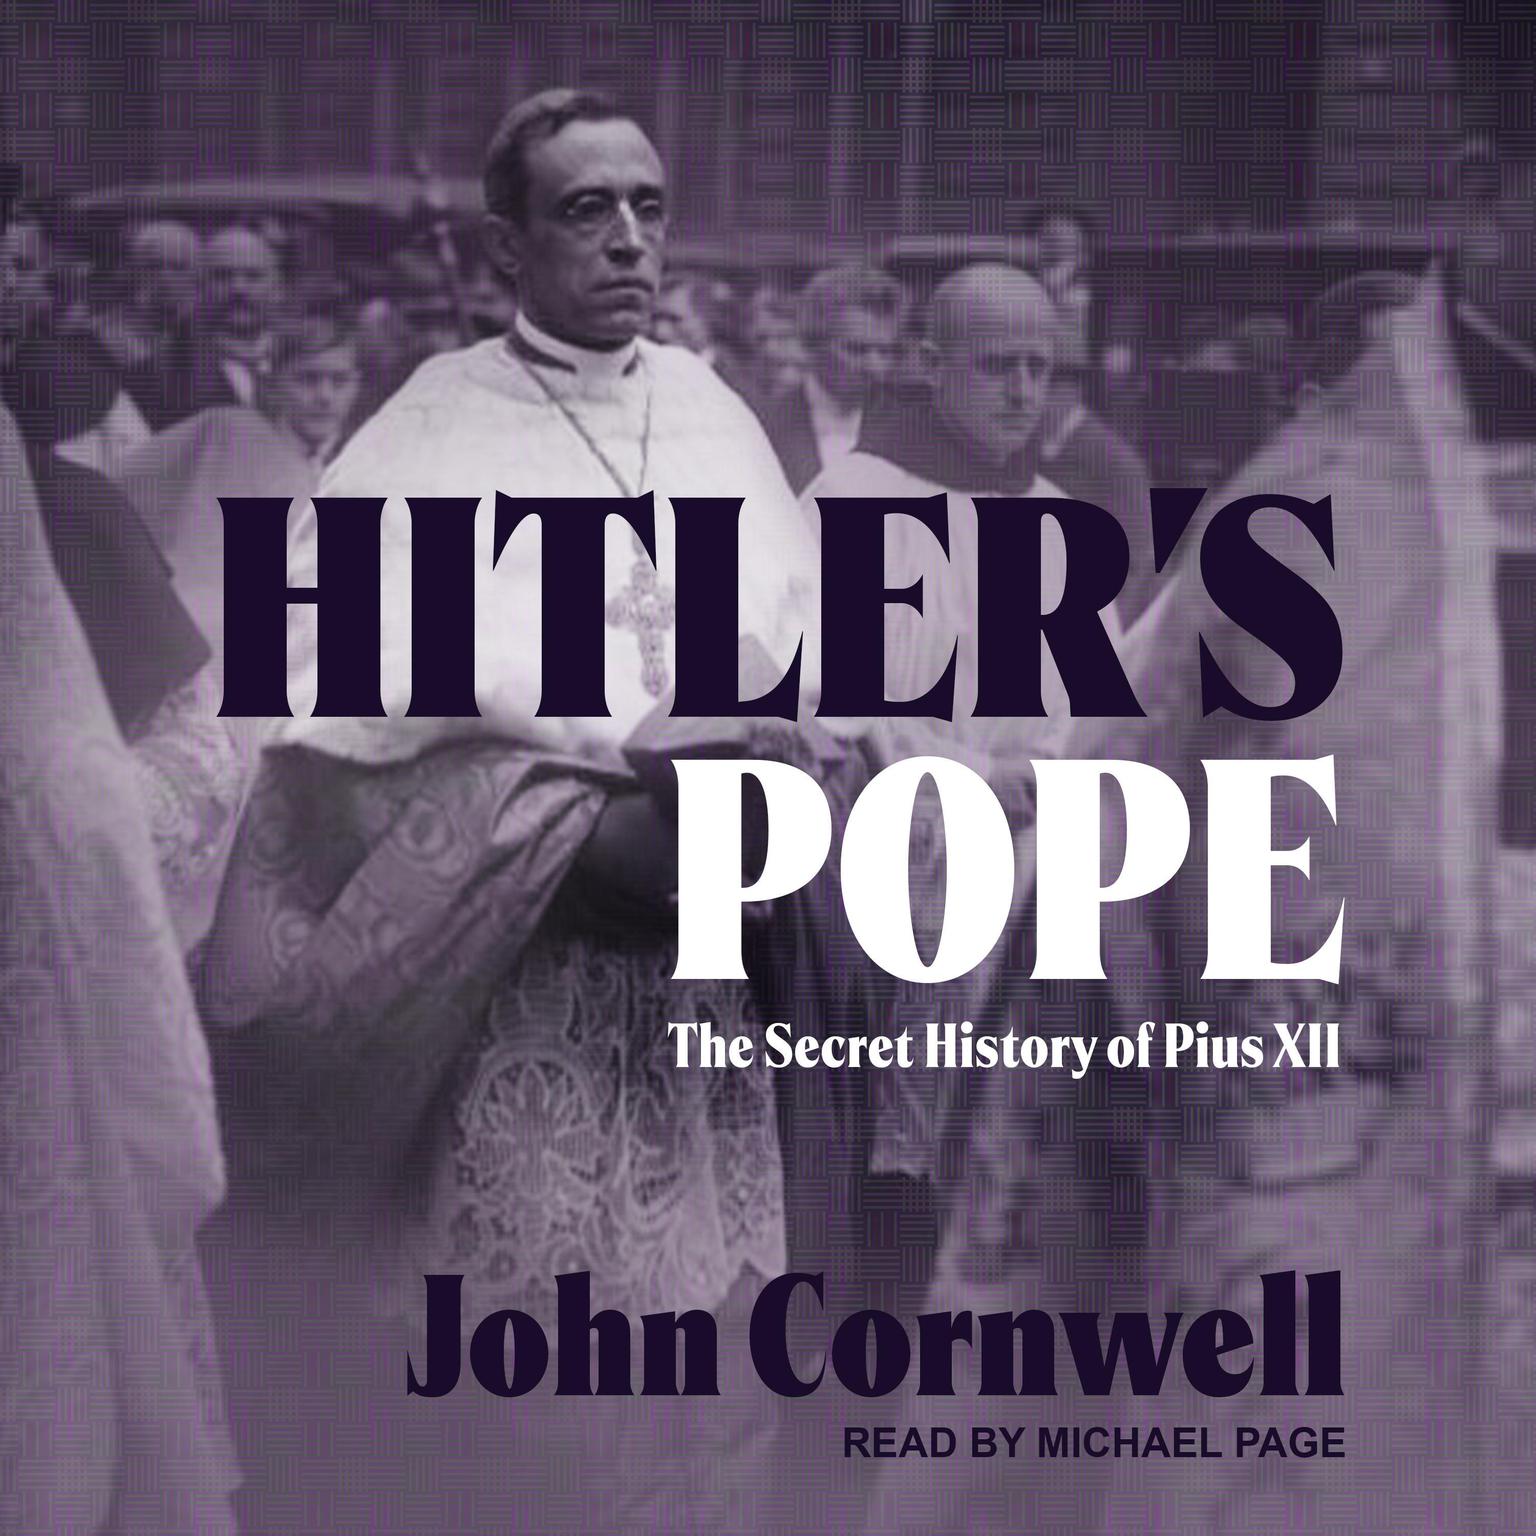 Hitlers Pope: The Secret History of Pius XII Audiobook, by John Cornwell